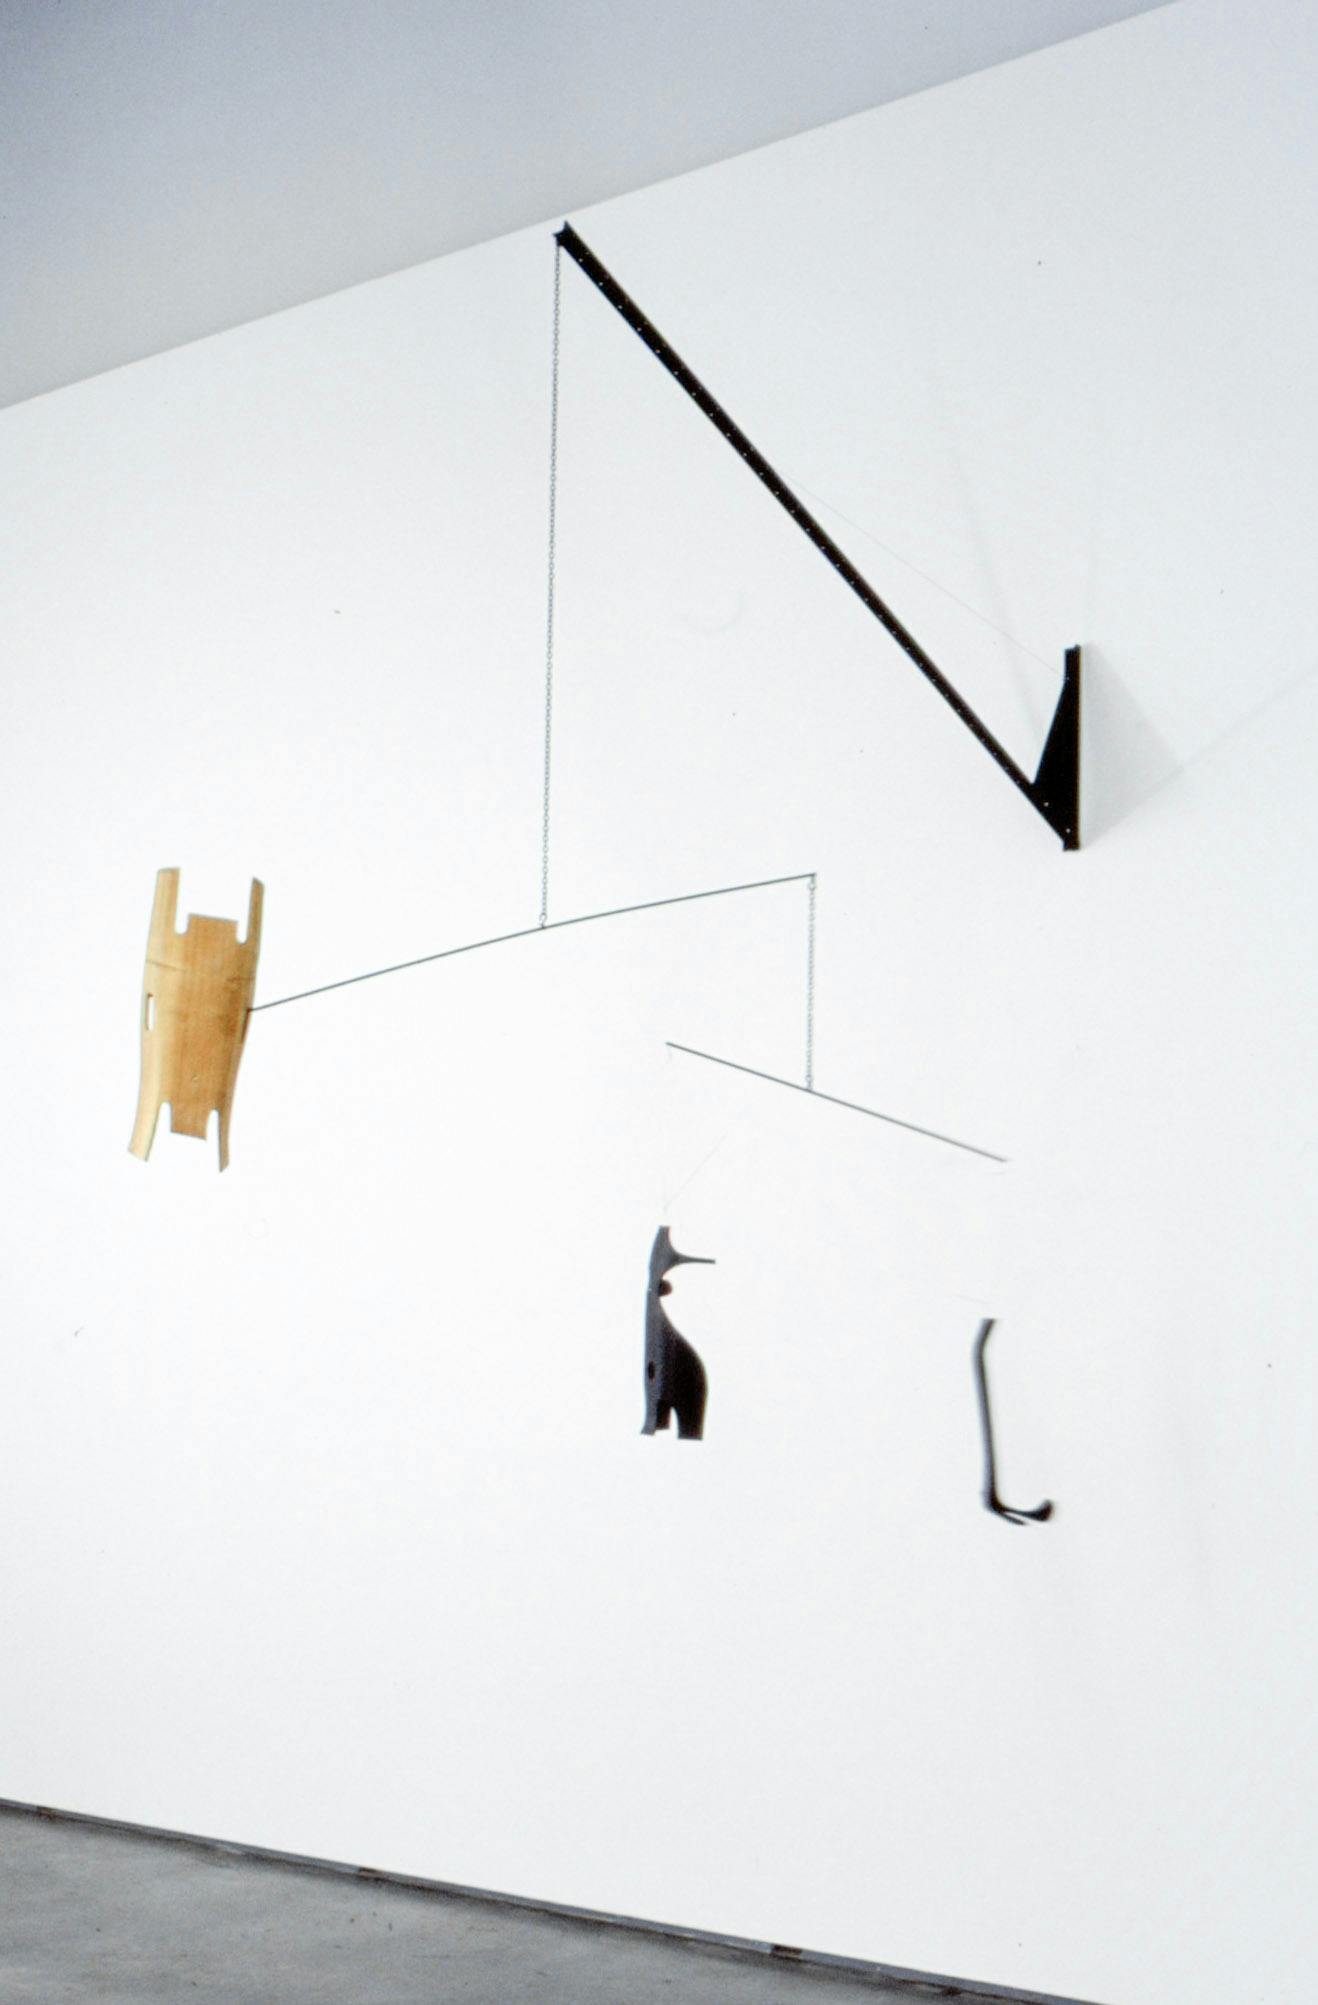 A sculpture is hanging from the wall in a gallery space. From the edge of the black stick attached to the wall, an object-attached wire is hanging down to the air. 